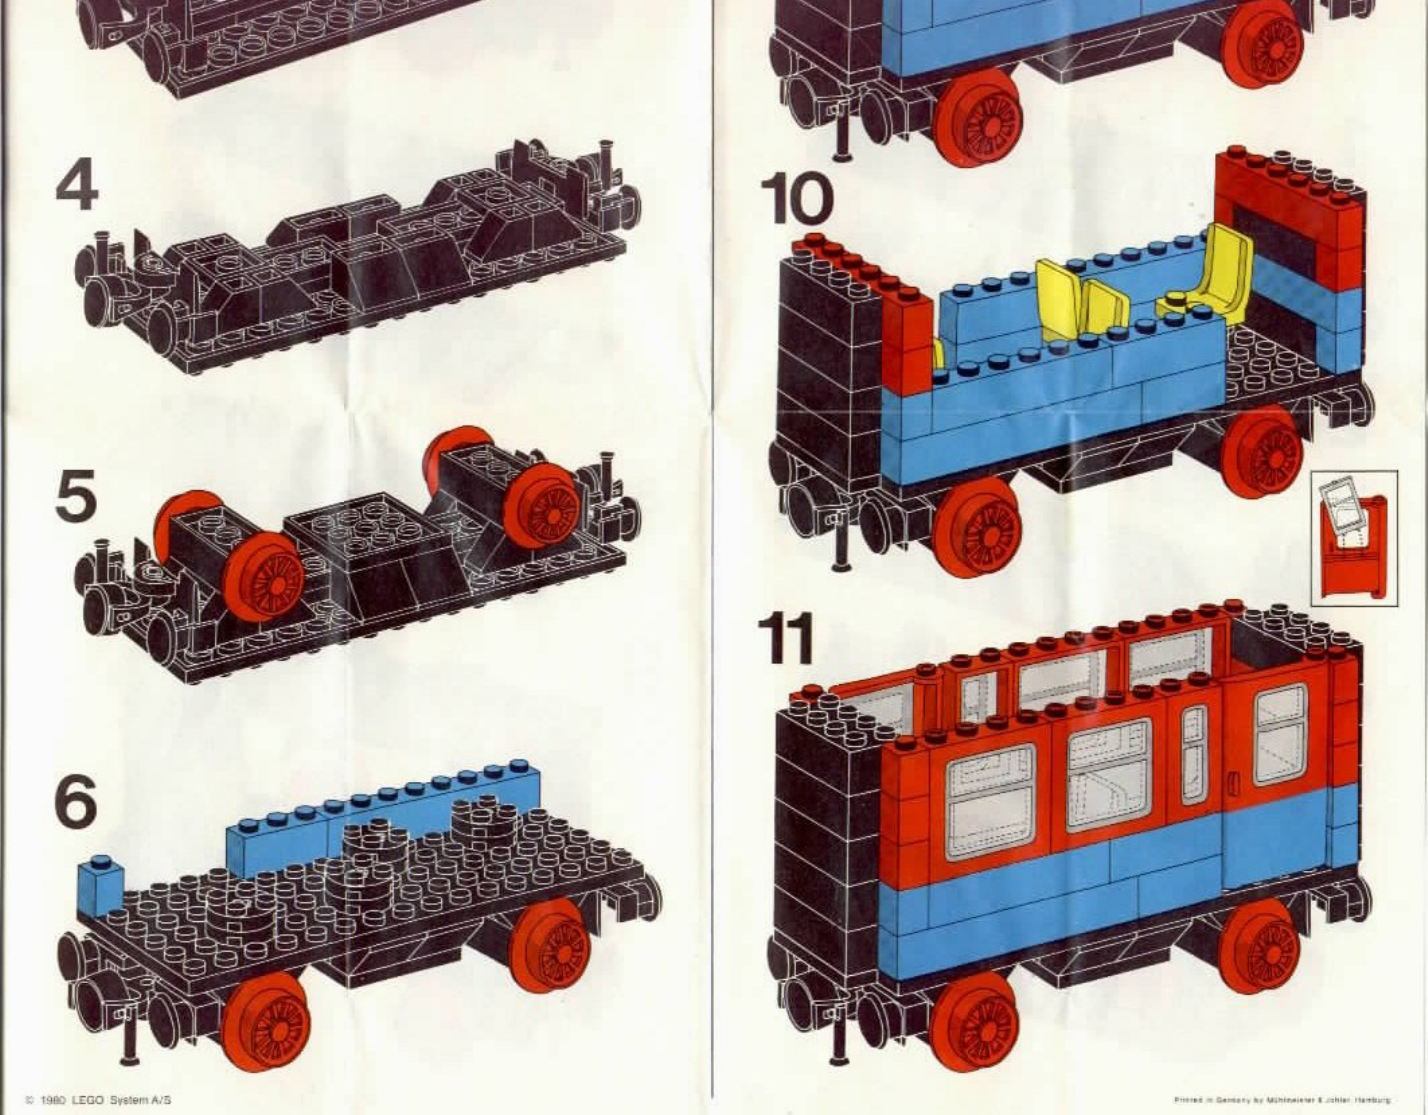 Manual Lego 7818 Page 5 Of 6 All Languages